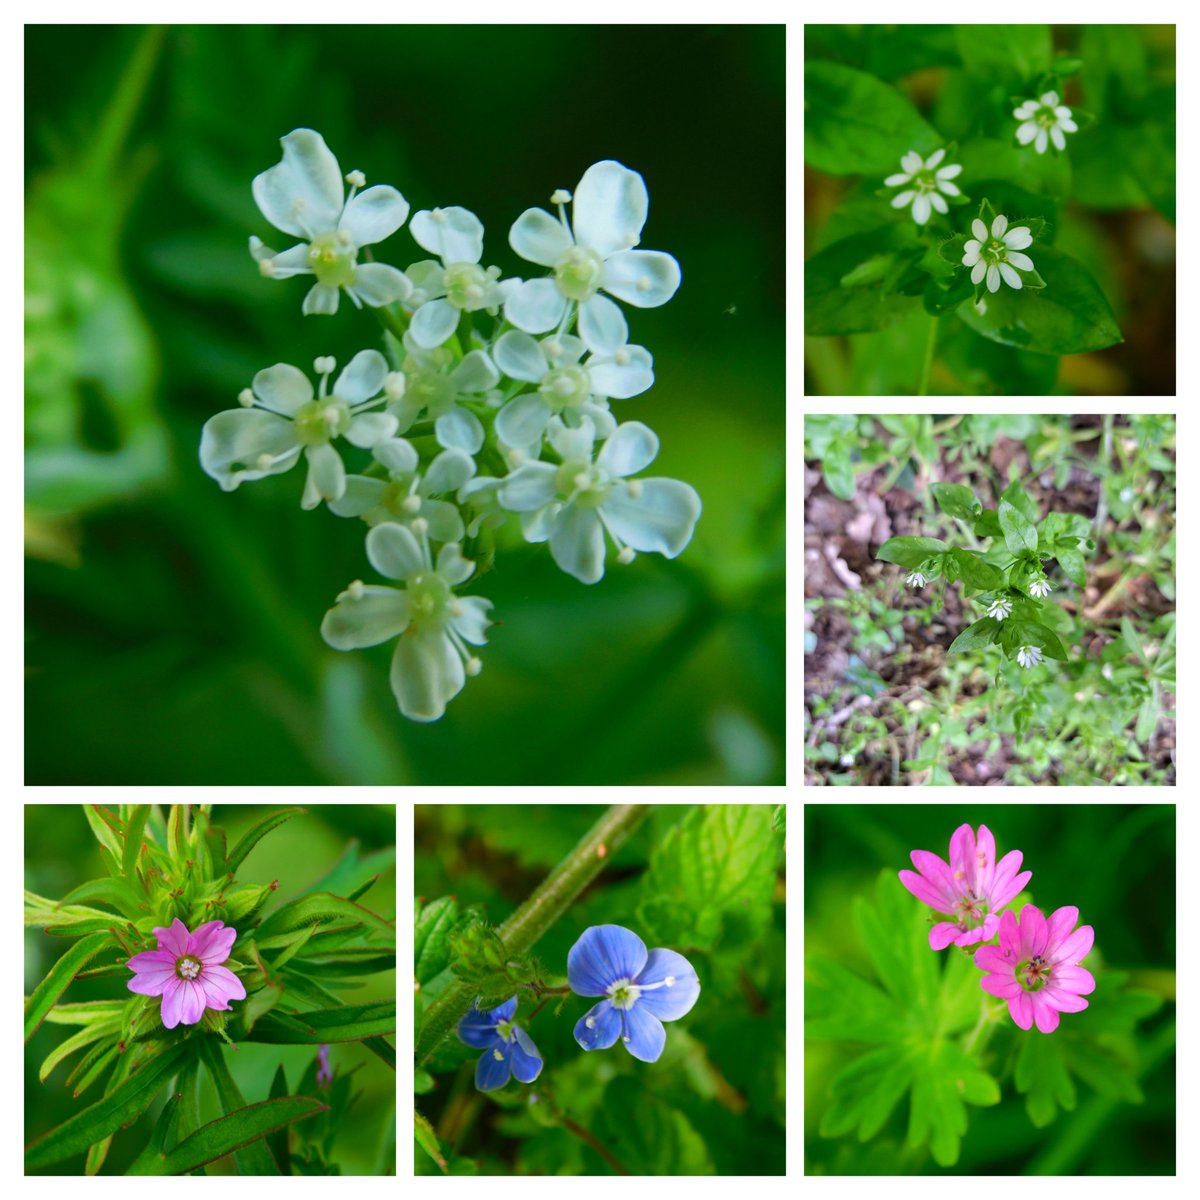 From my walk today #tinyflowers, individual flowers of cow parsley. Chickweed, cranesbill & speedwell #WildflowerHour